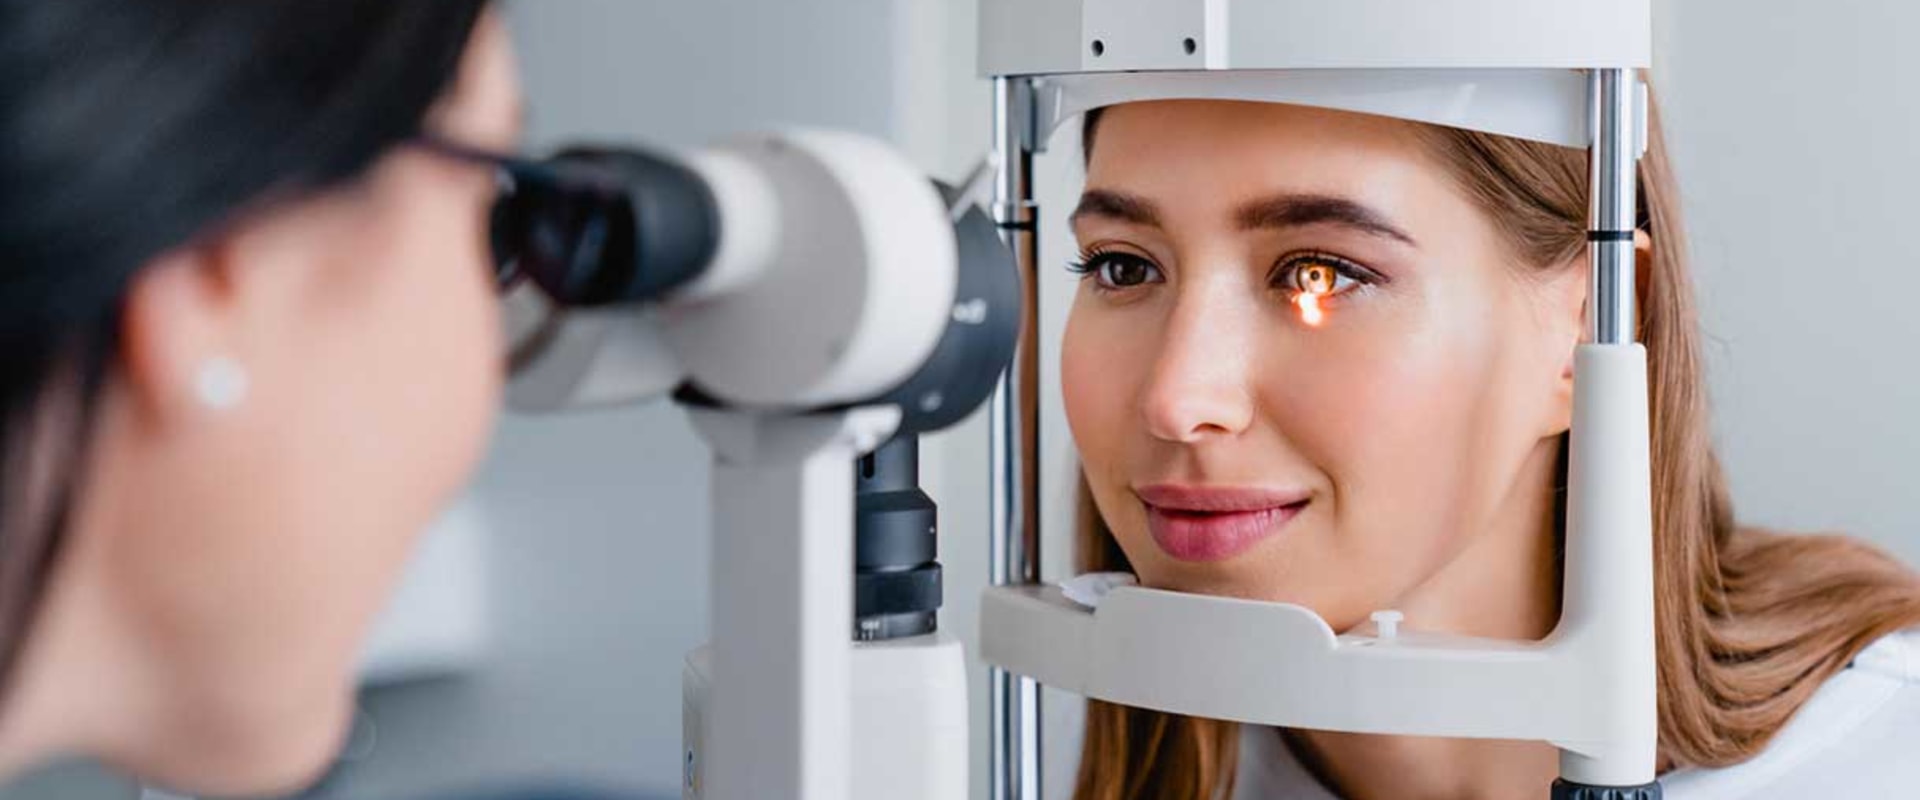 What Types of Eye Diseases Can an Optometrist Diagnose and Treat?